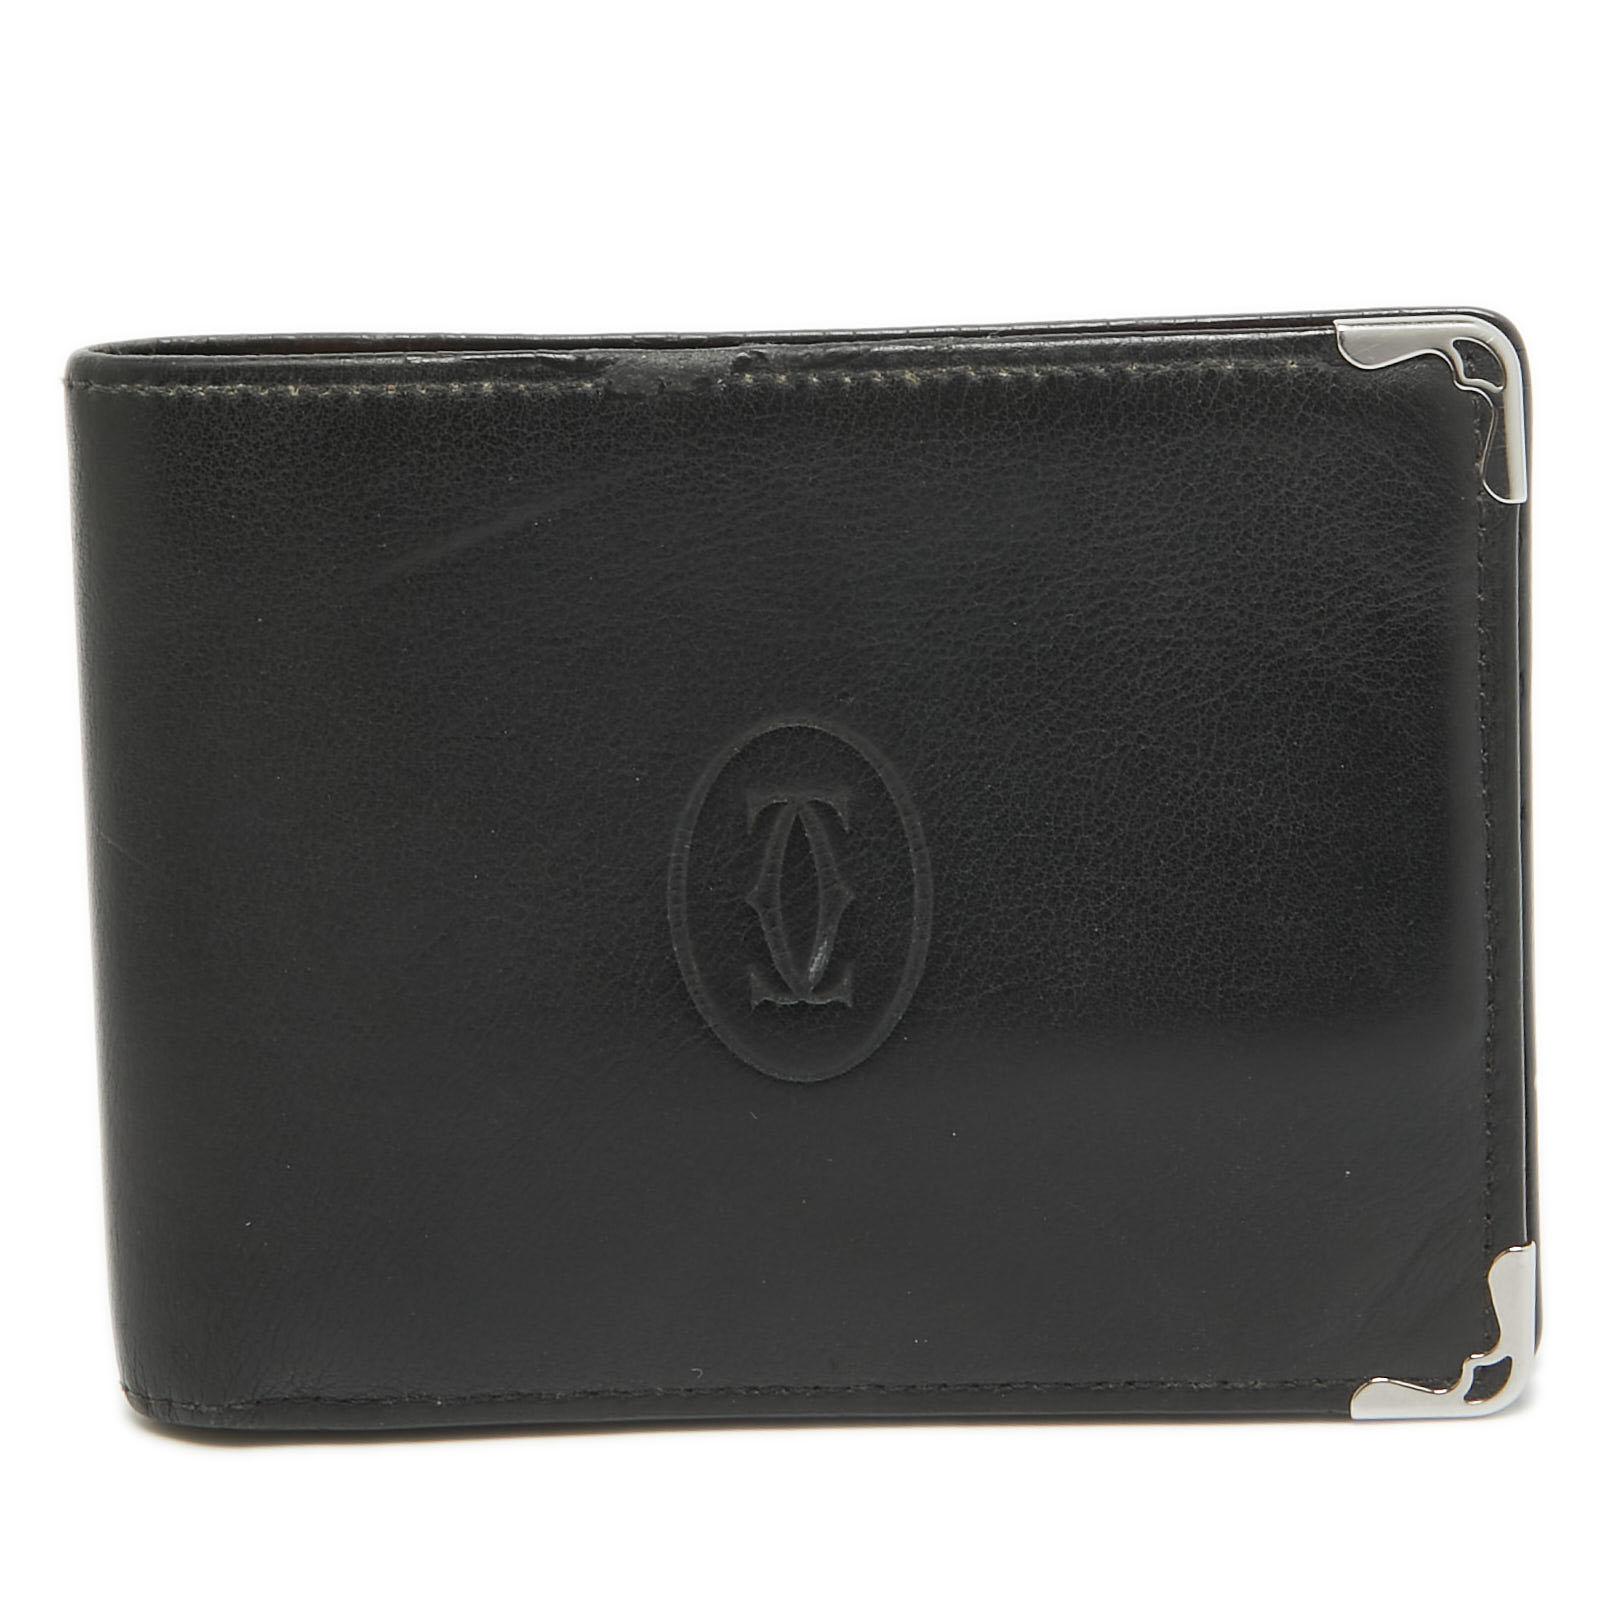 This designer wallet is an immaculate balance of sophistication and rational utility. It has been designed using prime quality materials and elevated by a sleek finish. The creation is equipped with ample space for your monetary essentials.